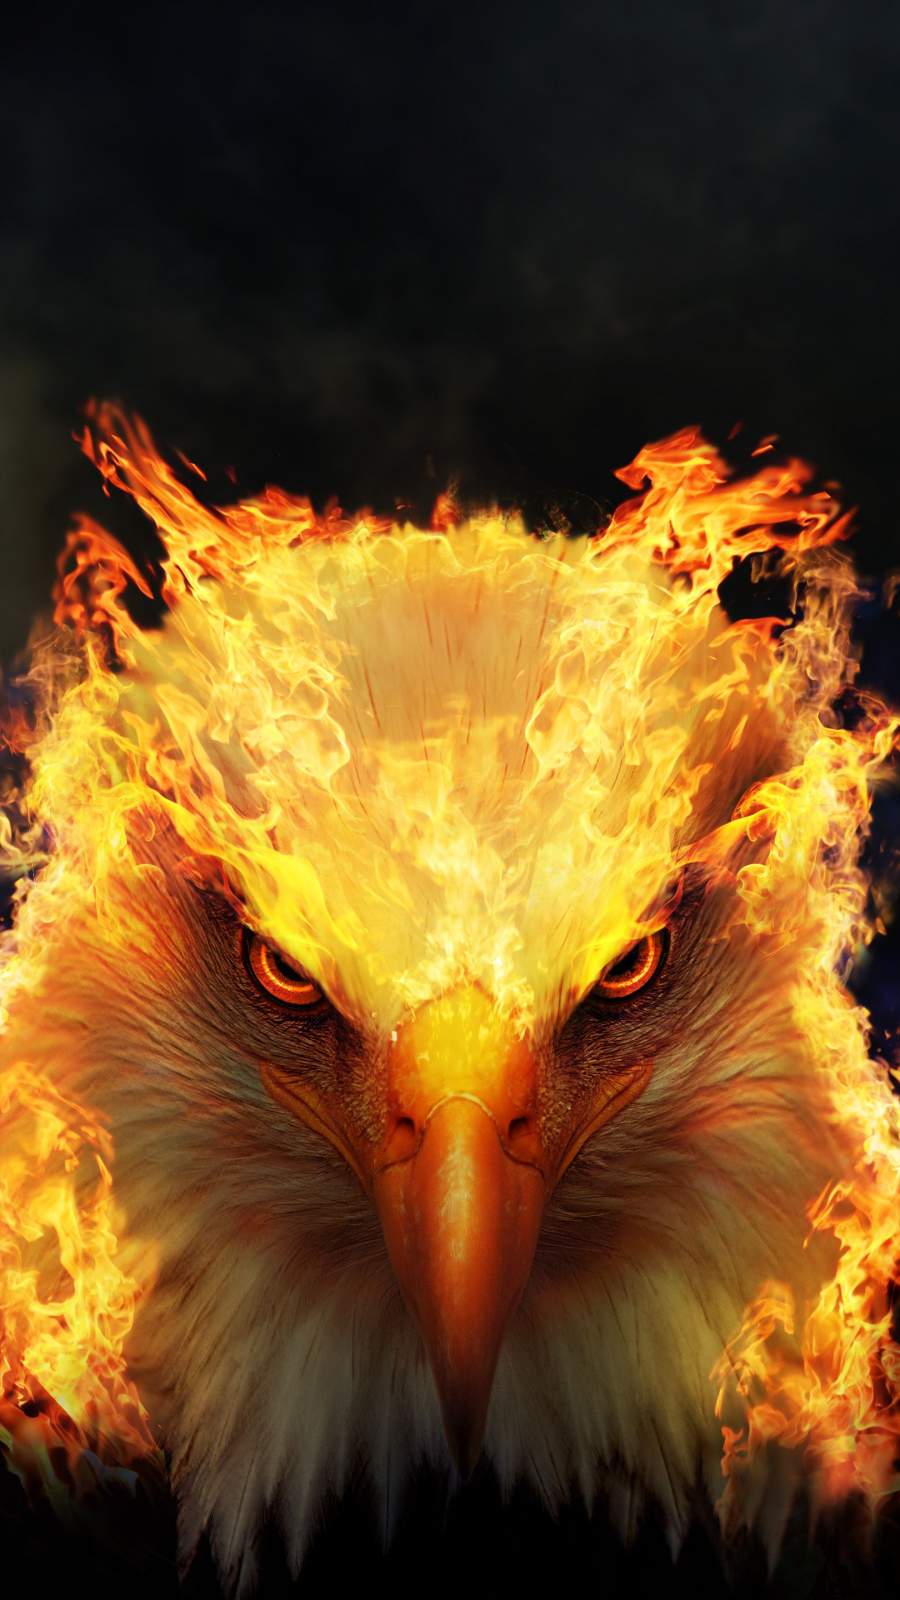 Phoenix Wallpapers and Backgrounds image Free Download